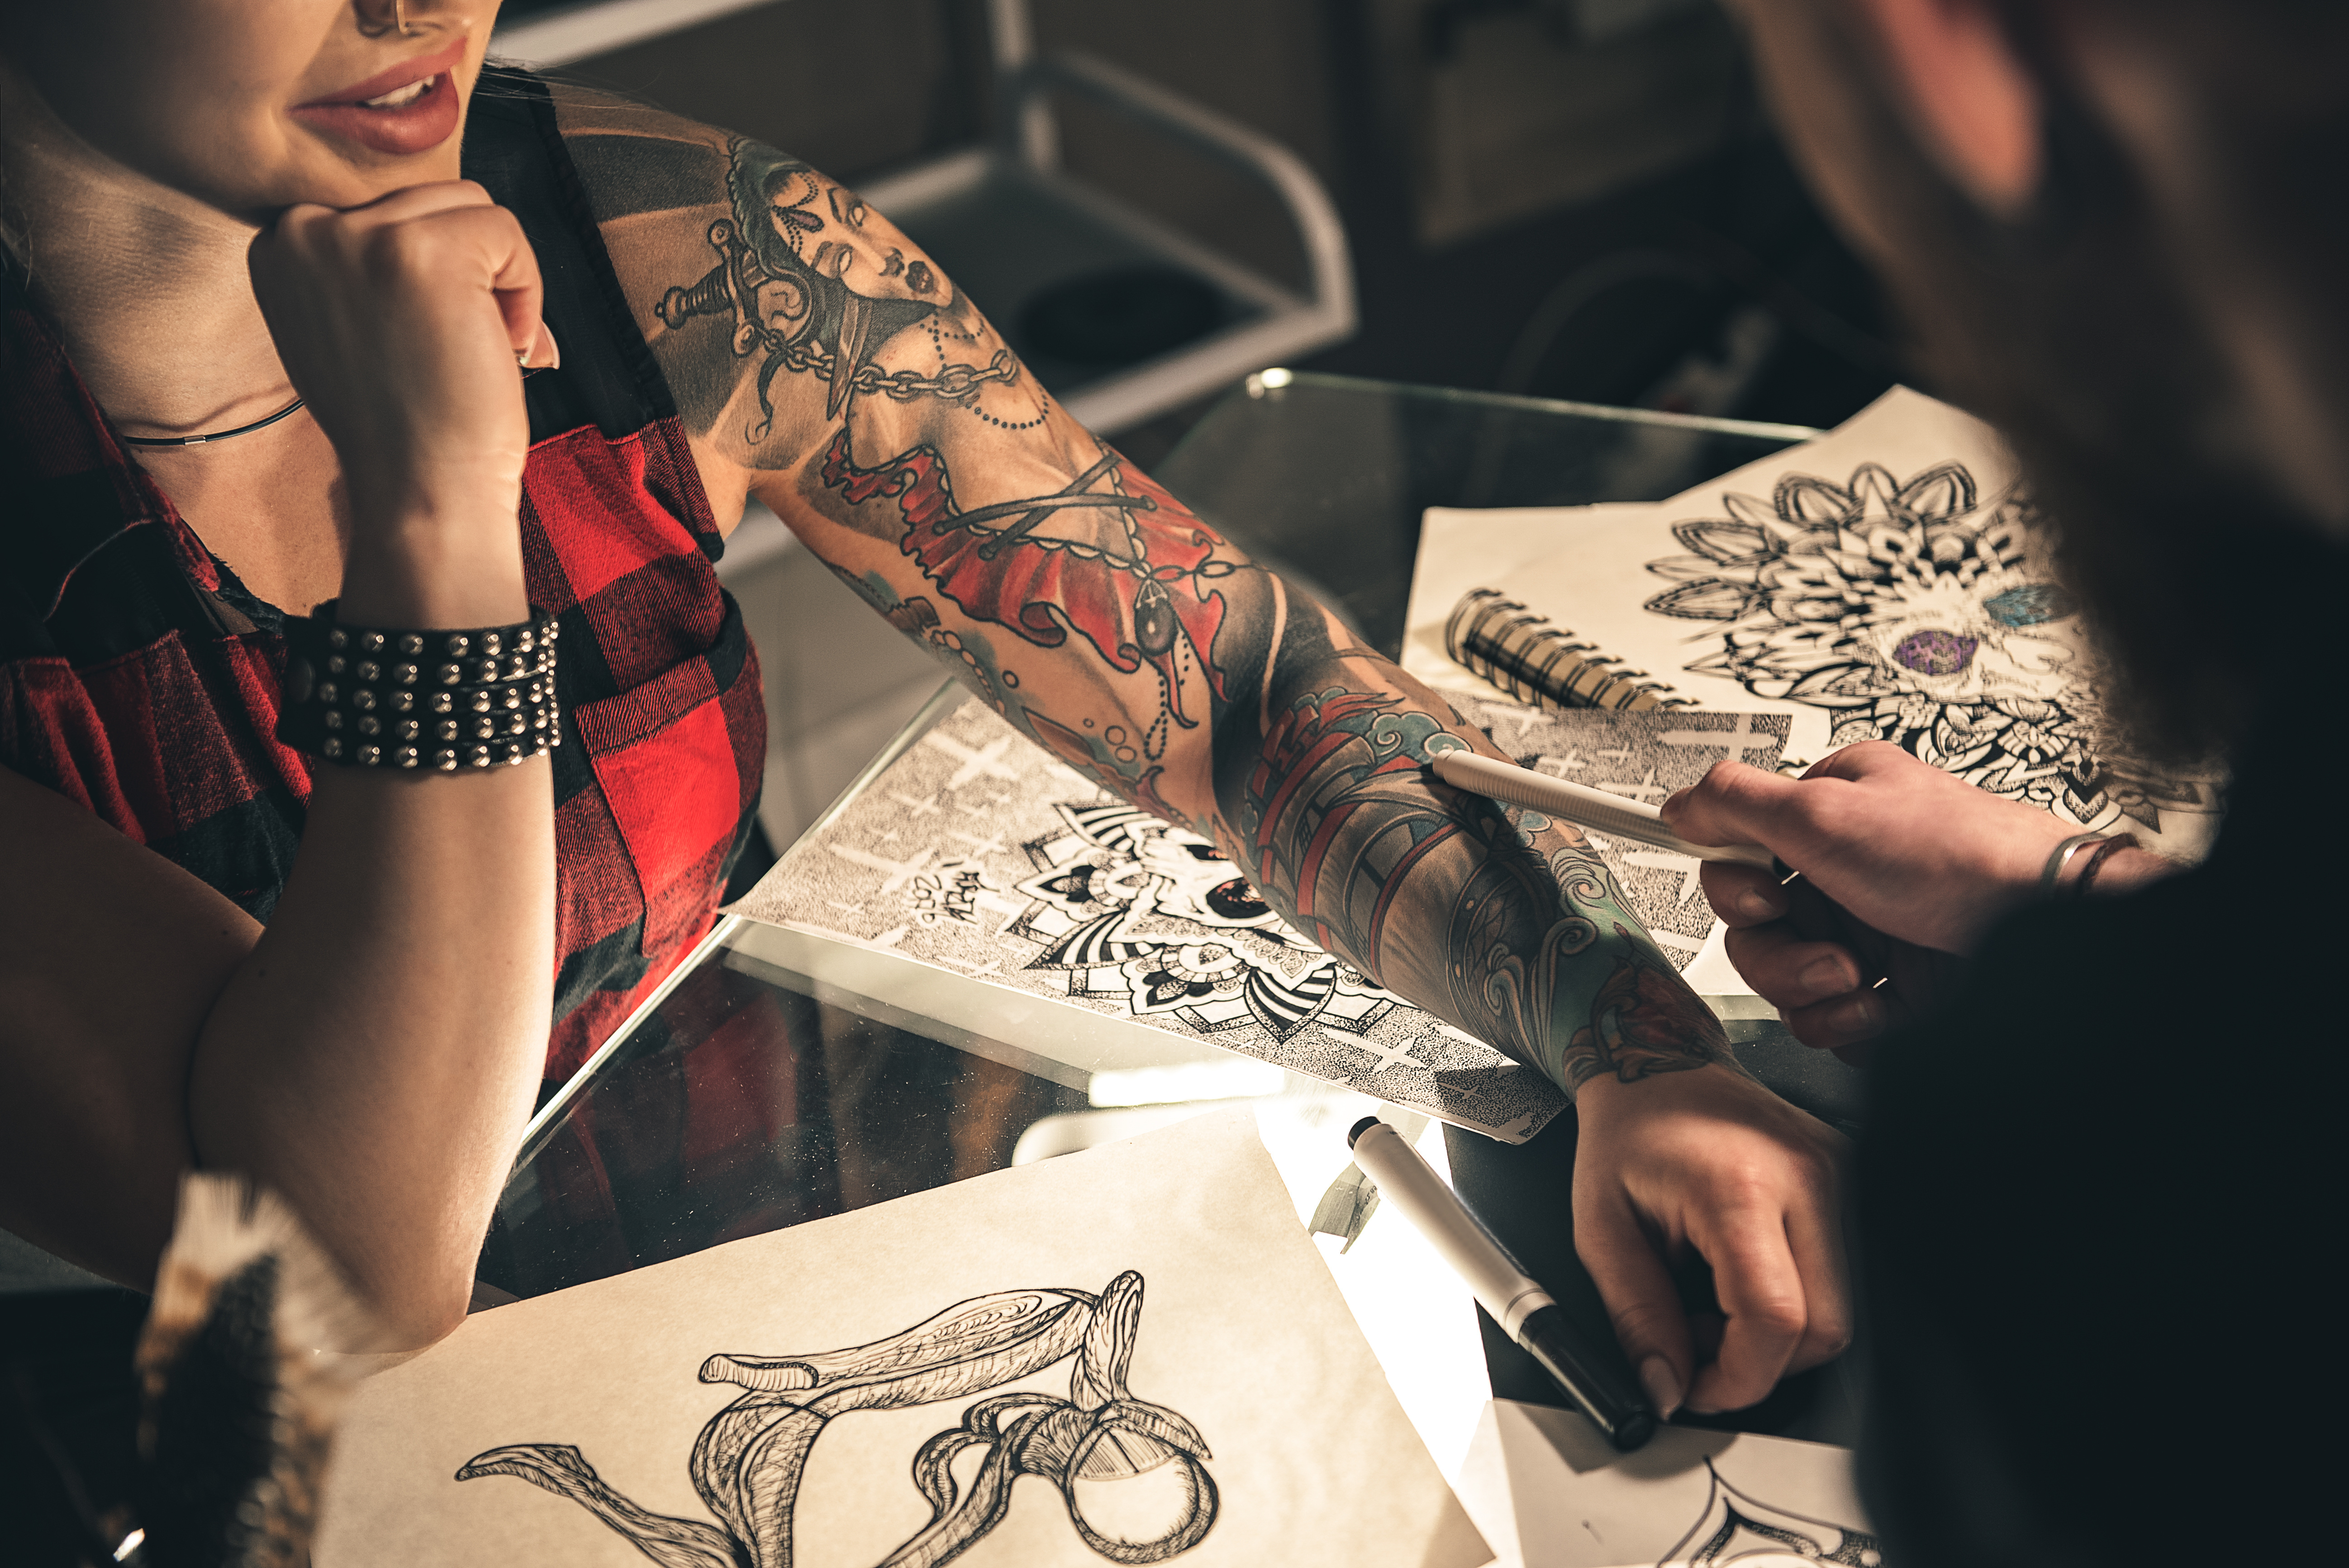 woman with tattoos sitting at a table with man showing design sheets